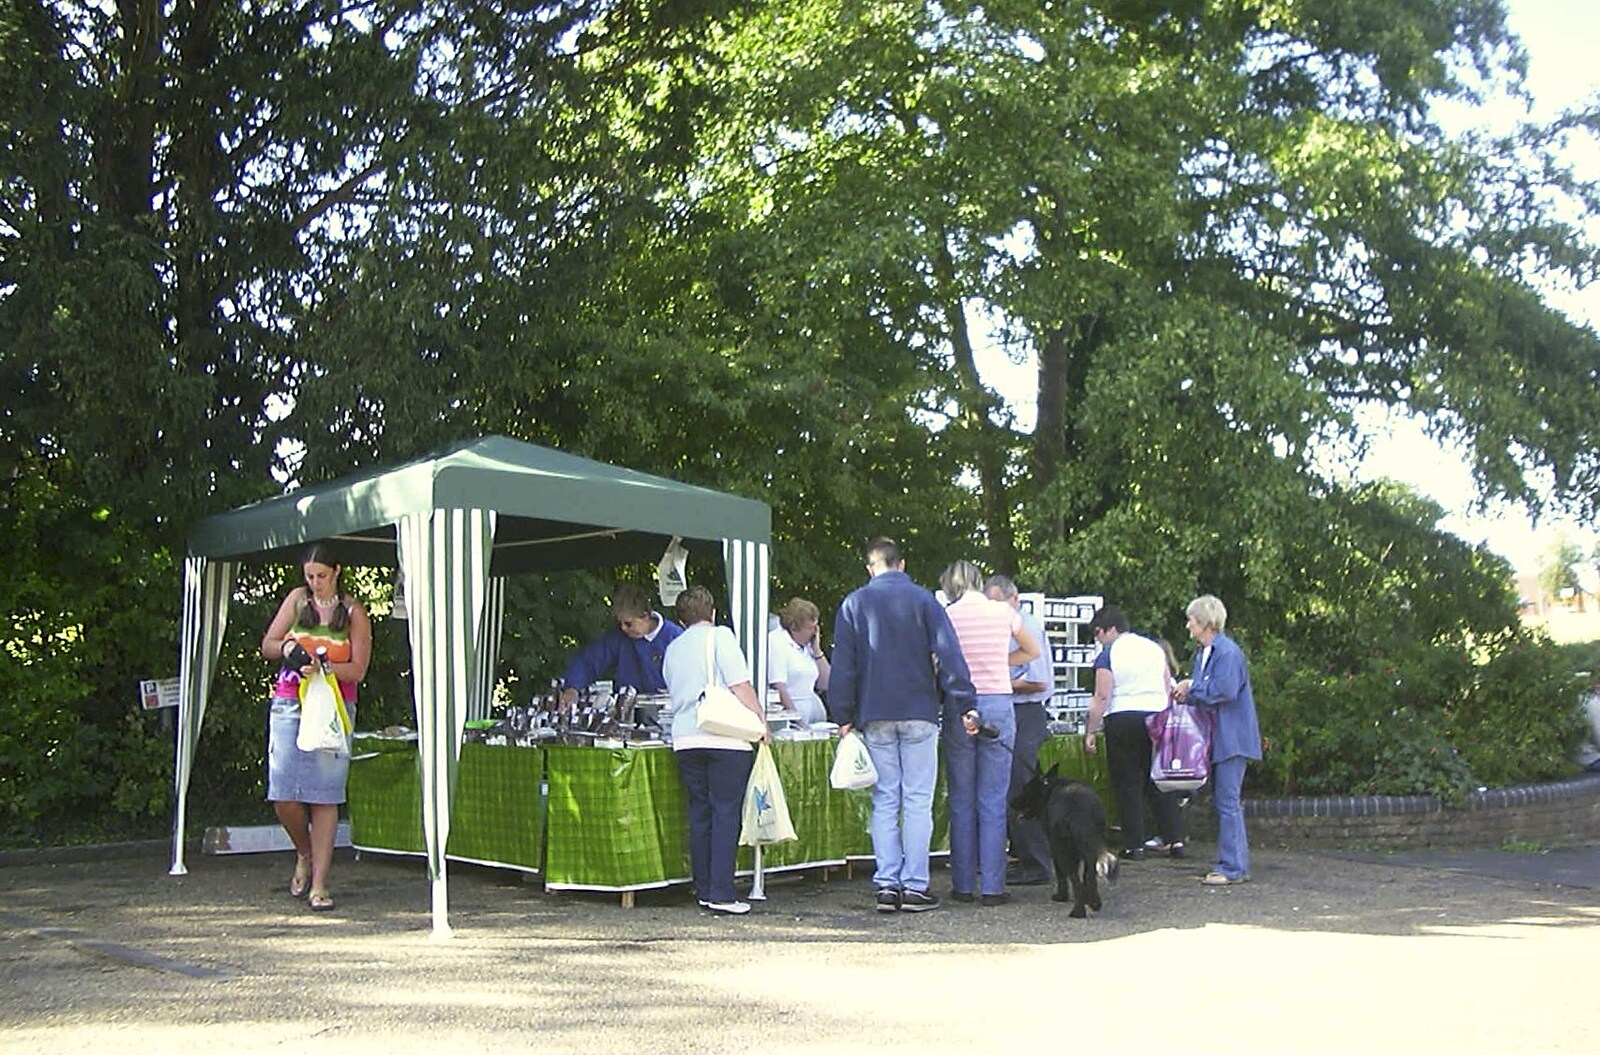 A food tent near the Mere from Ten Pin Bowling, Norwich, Norfolk - 13th September 2003